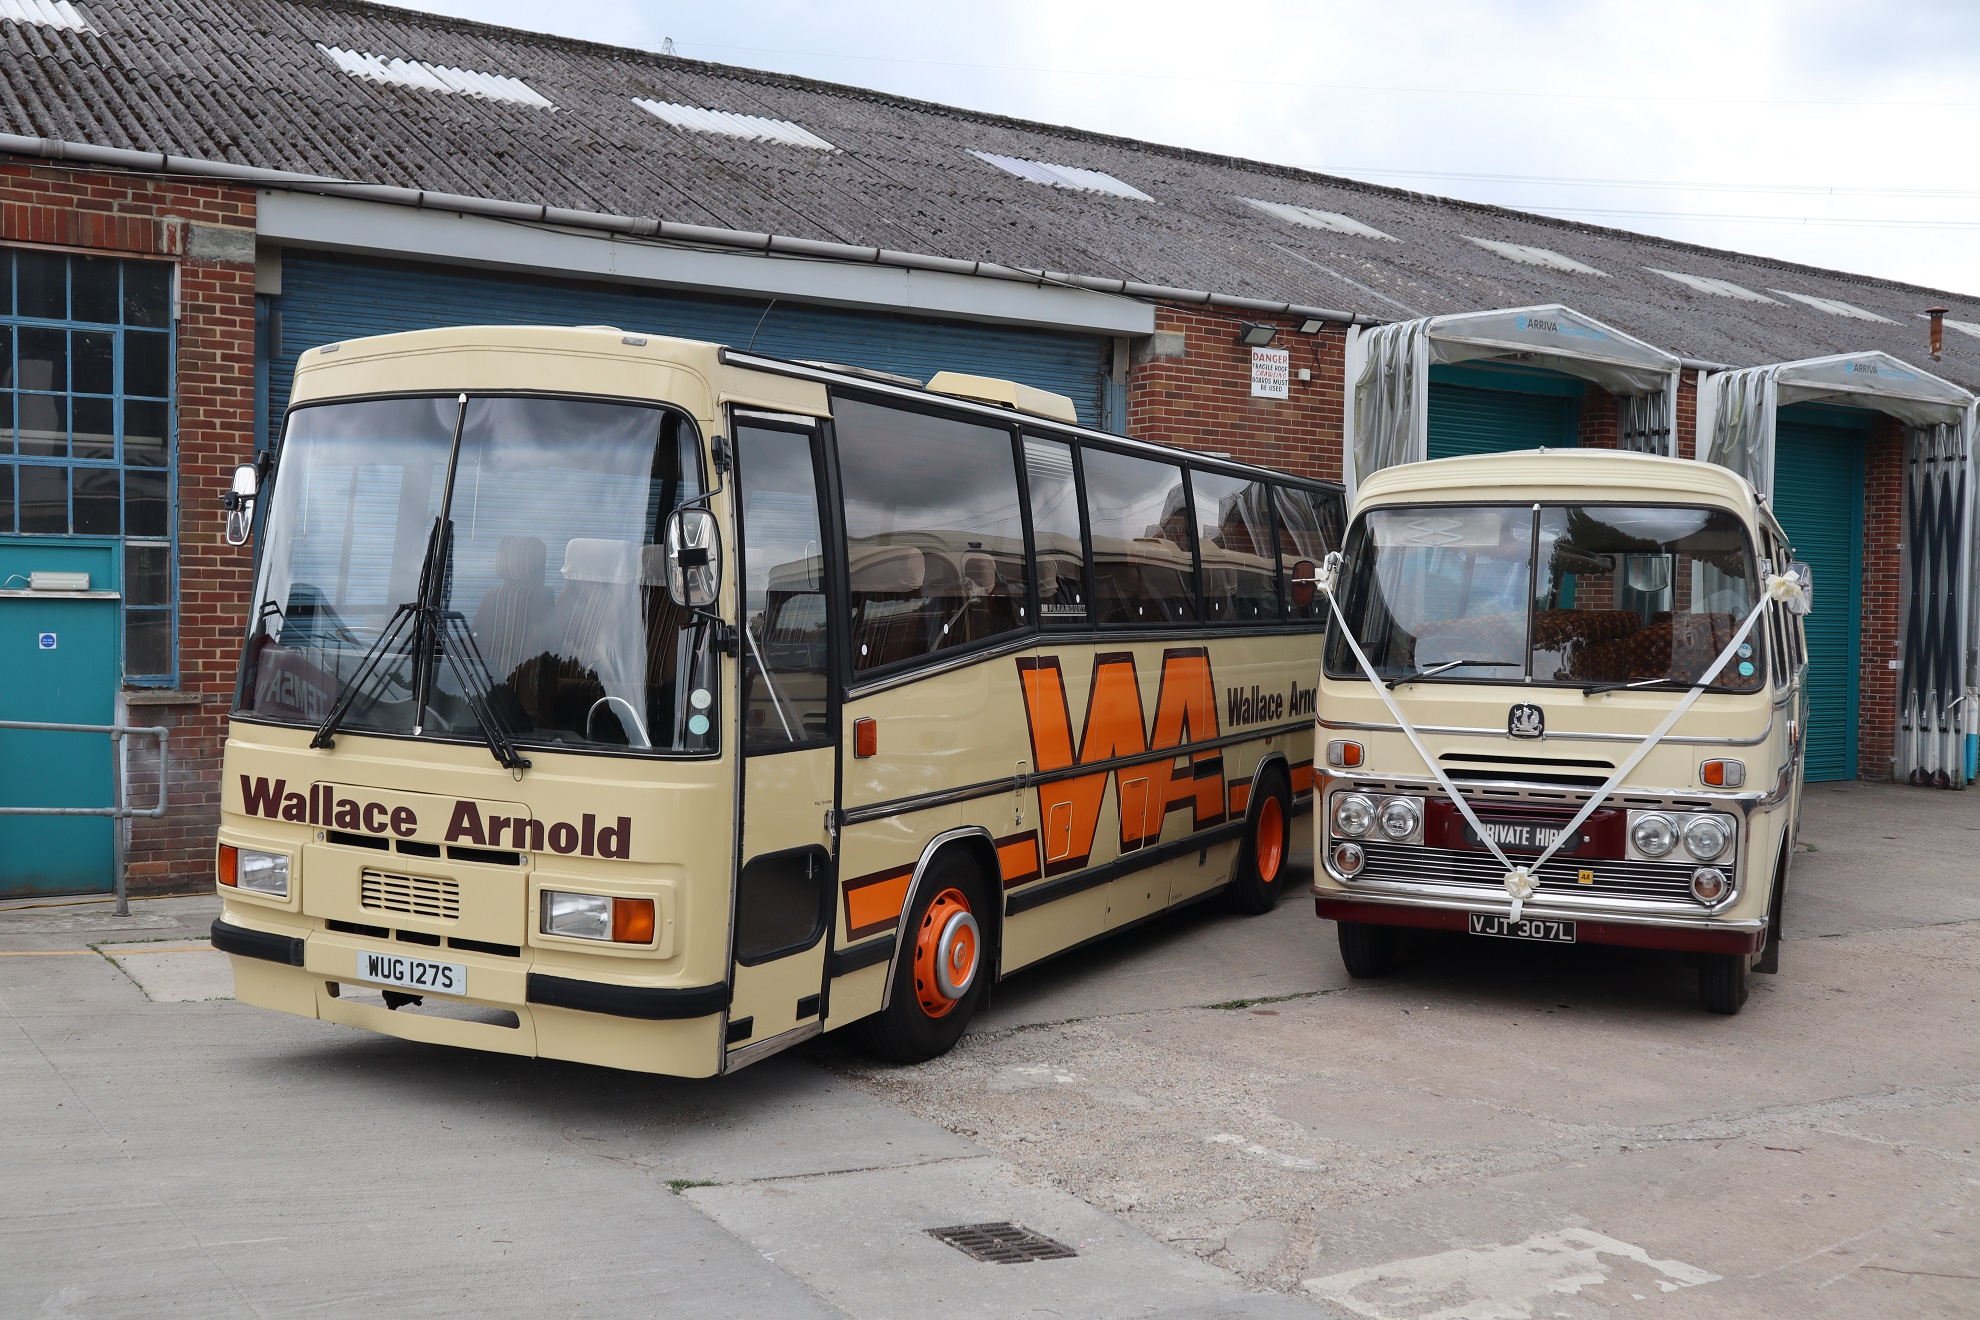 Leyland Leopard and Bedford SB5 at Coachfest